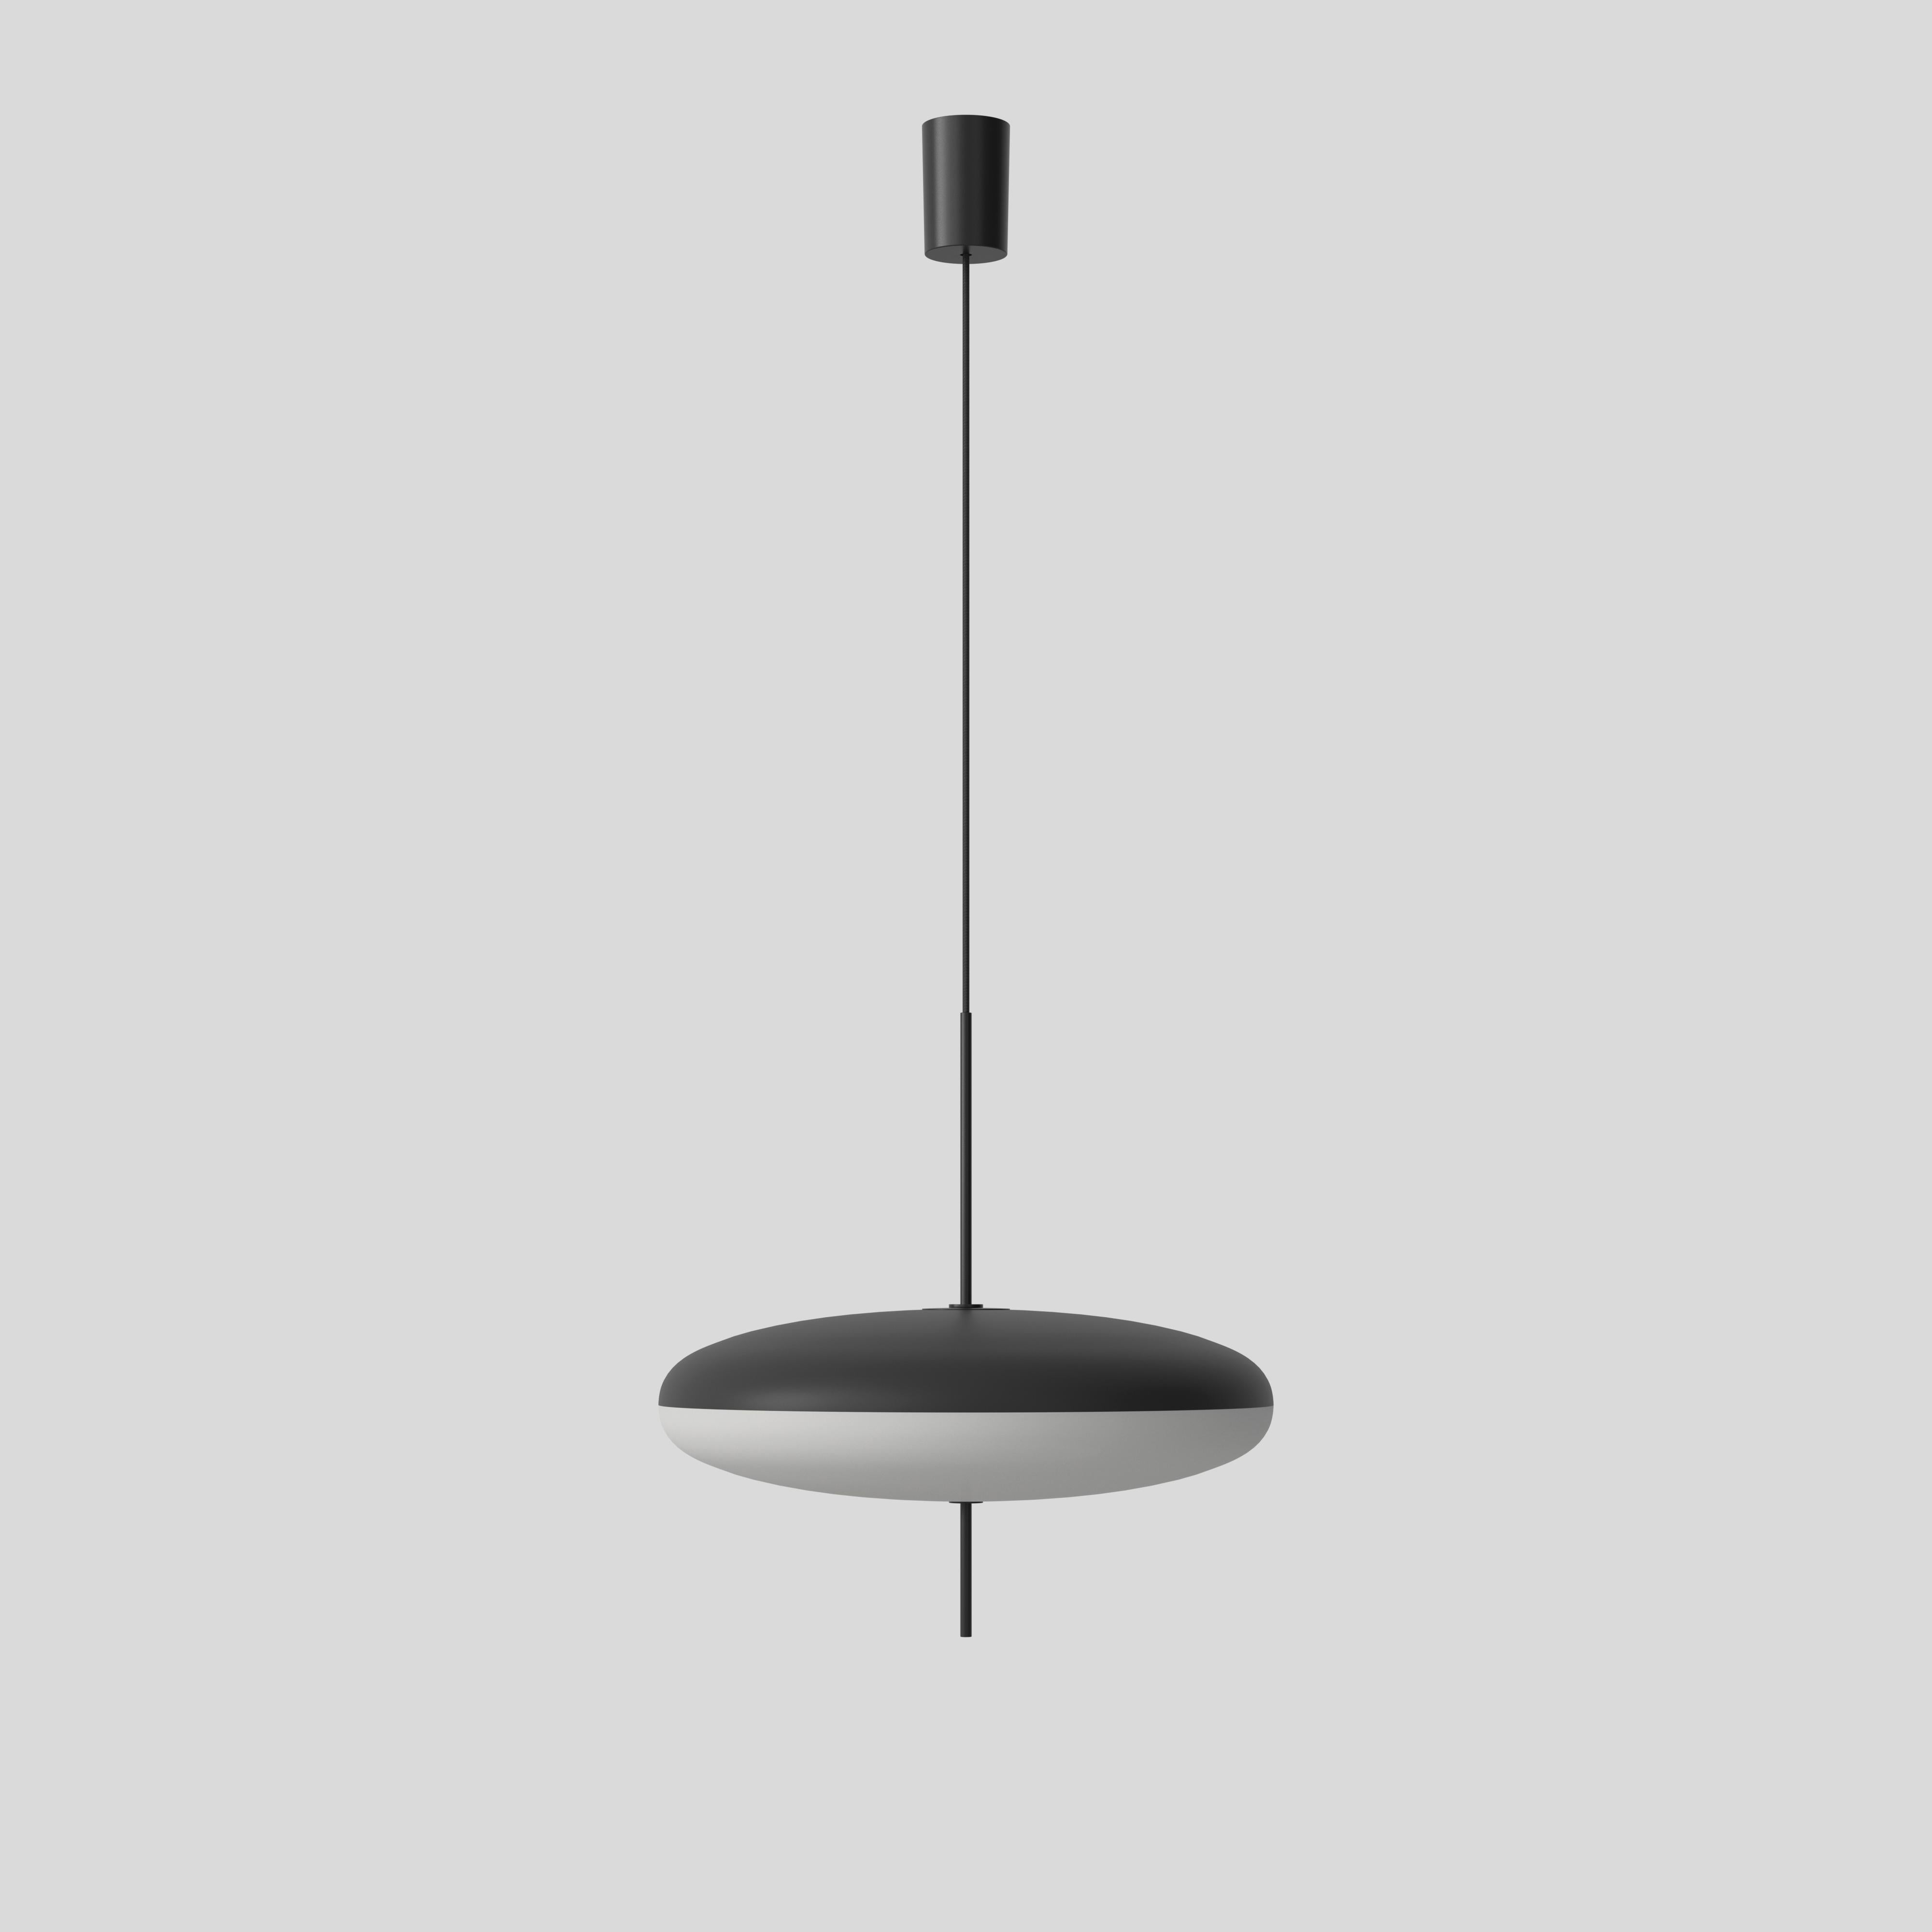 Gino Sarfatti lamp model 2065.
Black white diffuser, black hardware, black cable.
Manufactured by Astep

Model 2065
Design by Gino Sarfatti
The 2065 is made of two joined opaline methacrylate saucer-shaped diffusers suspended from the ceiling with a